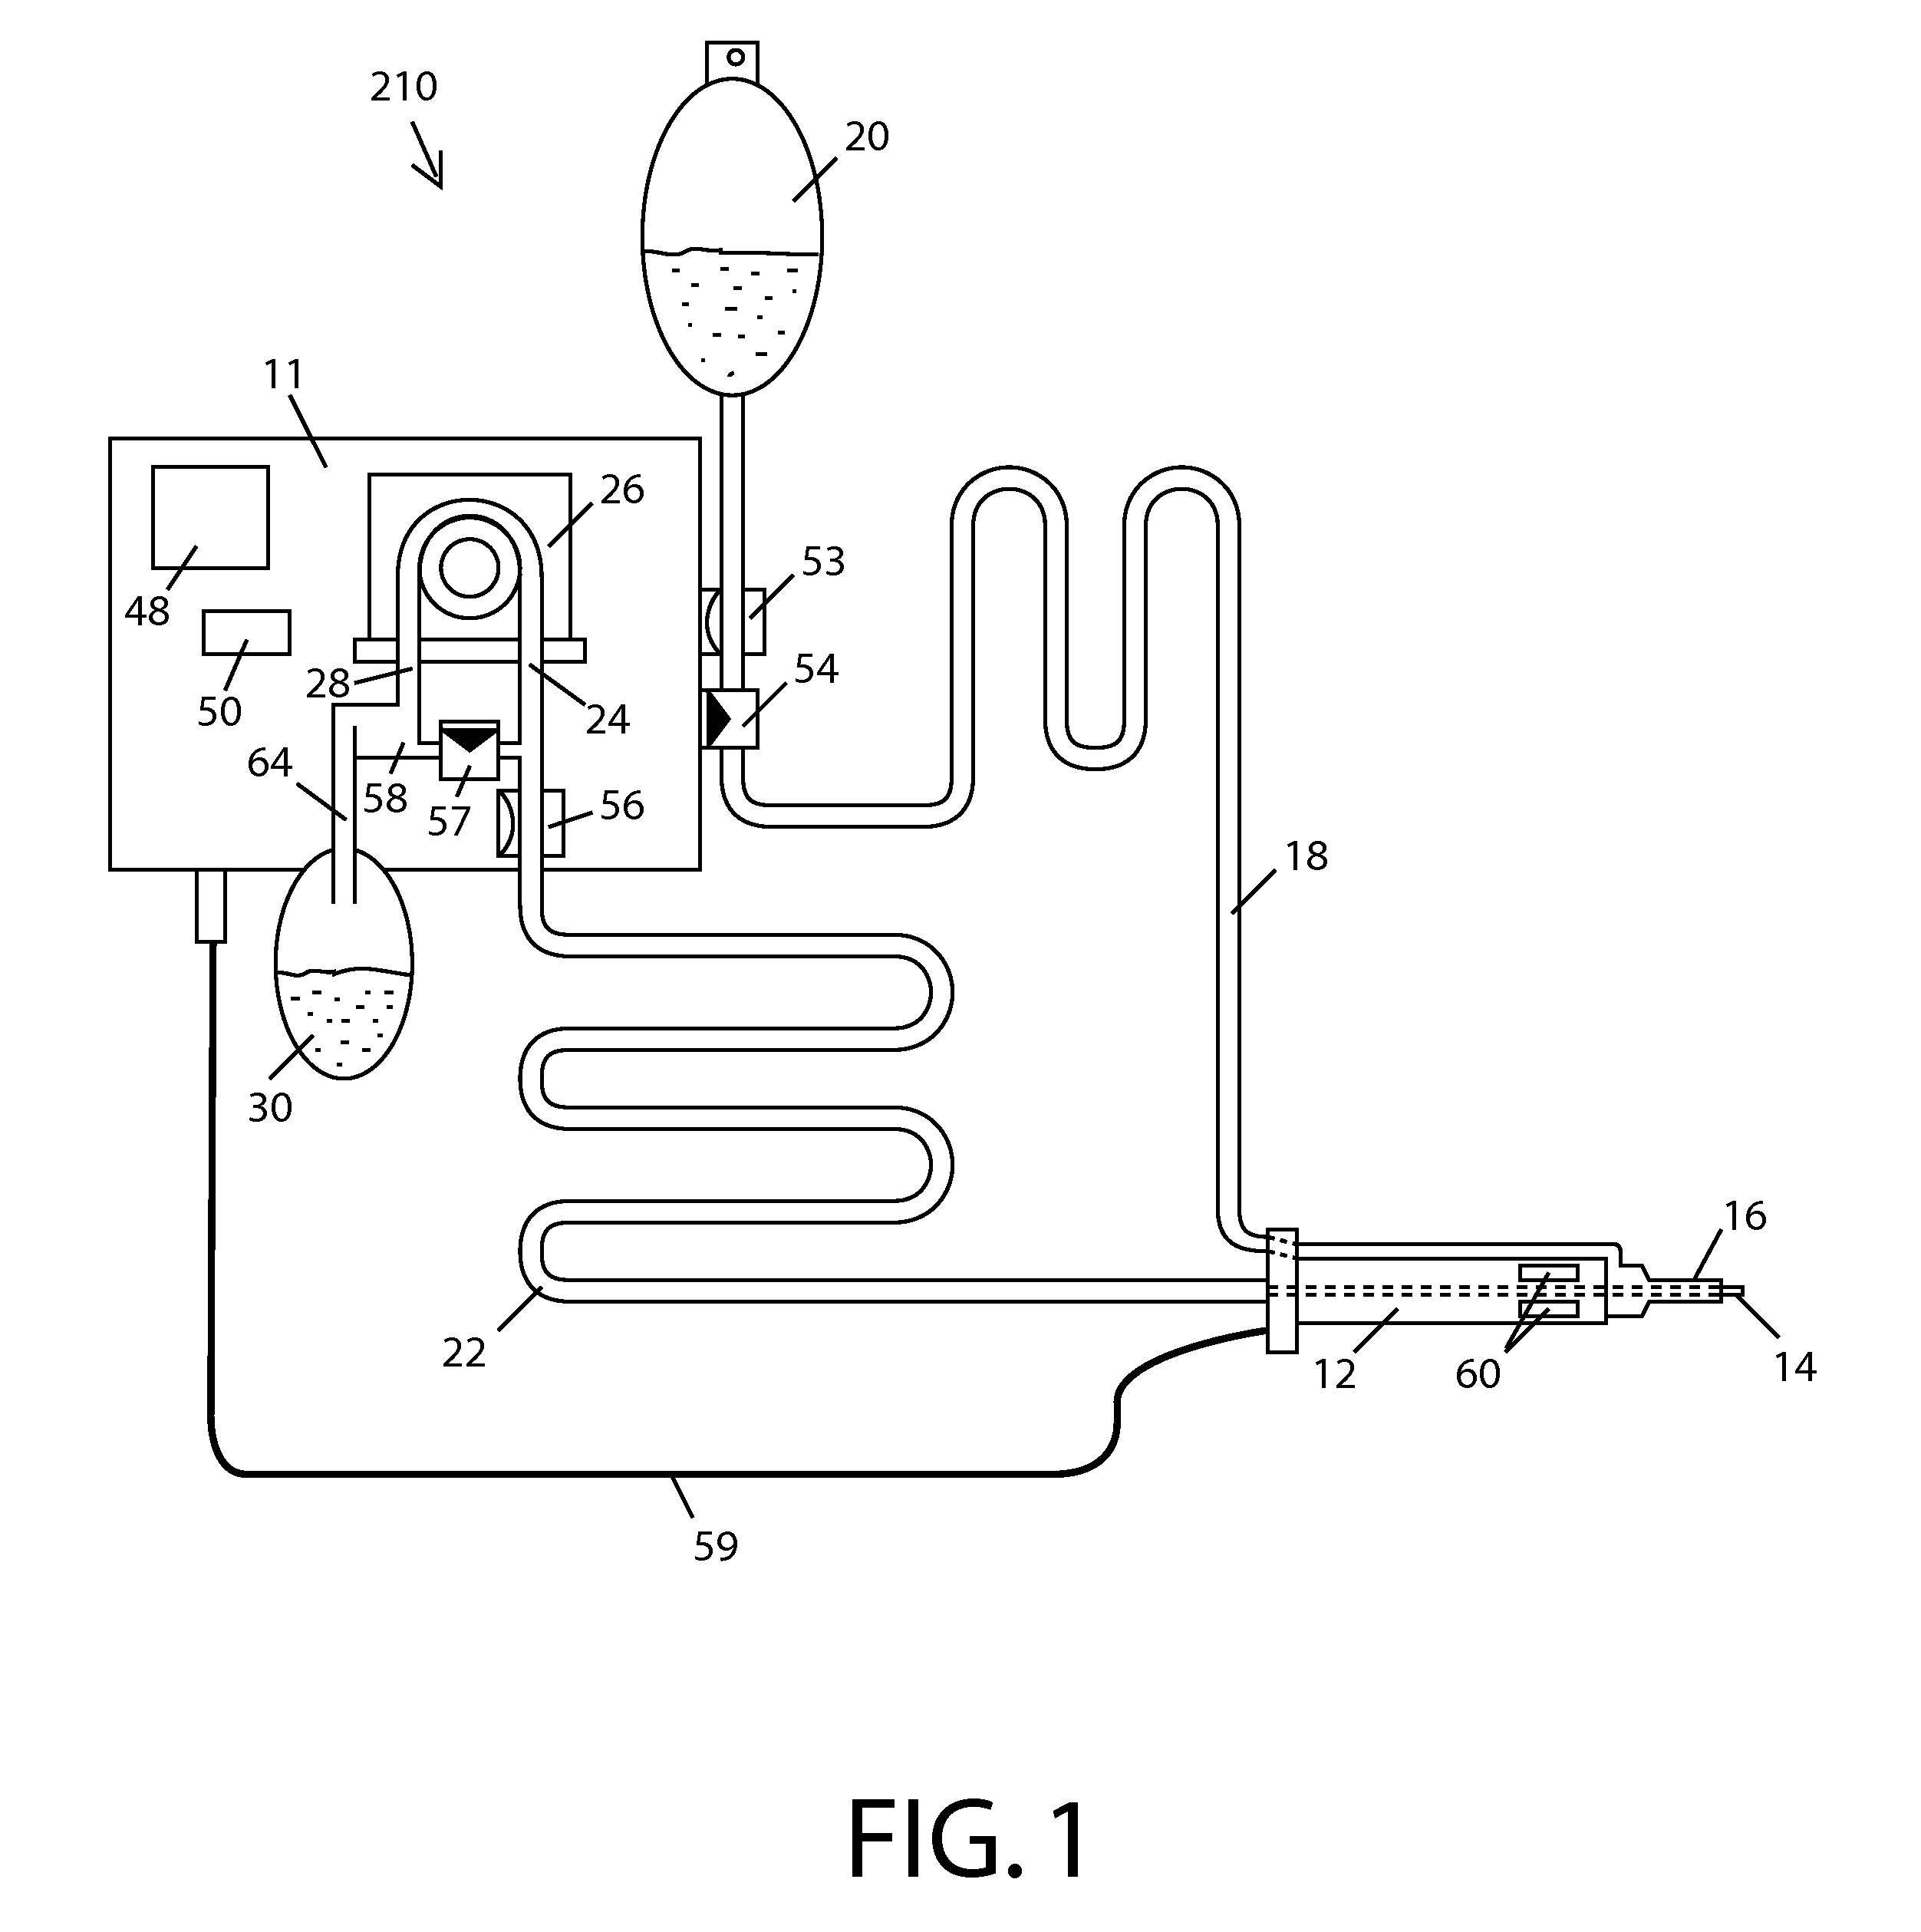 Post-occlusion chamber collapse suppressing system for a surgical apparatus and method of use